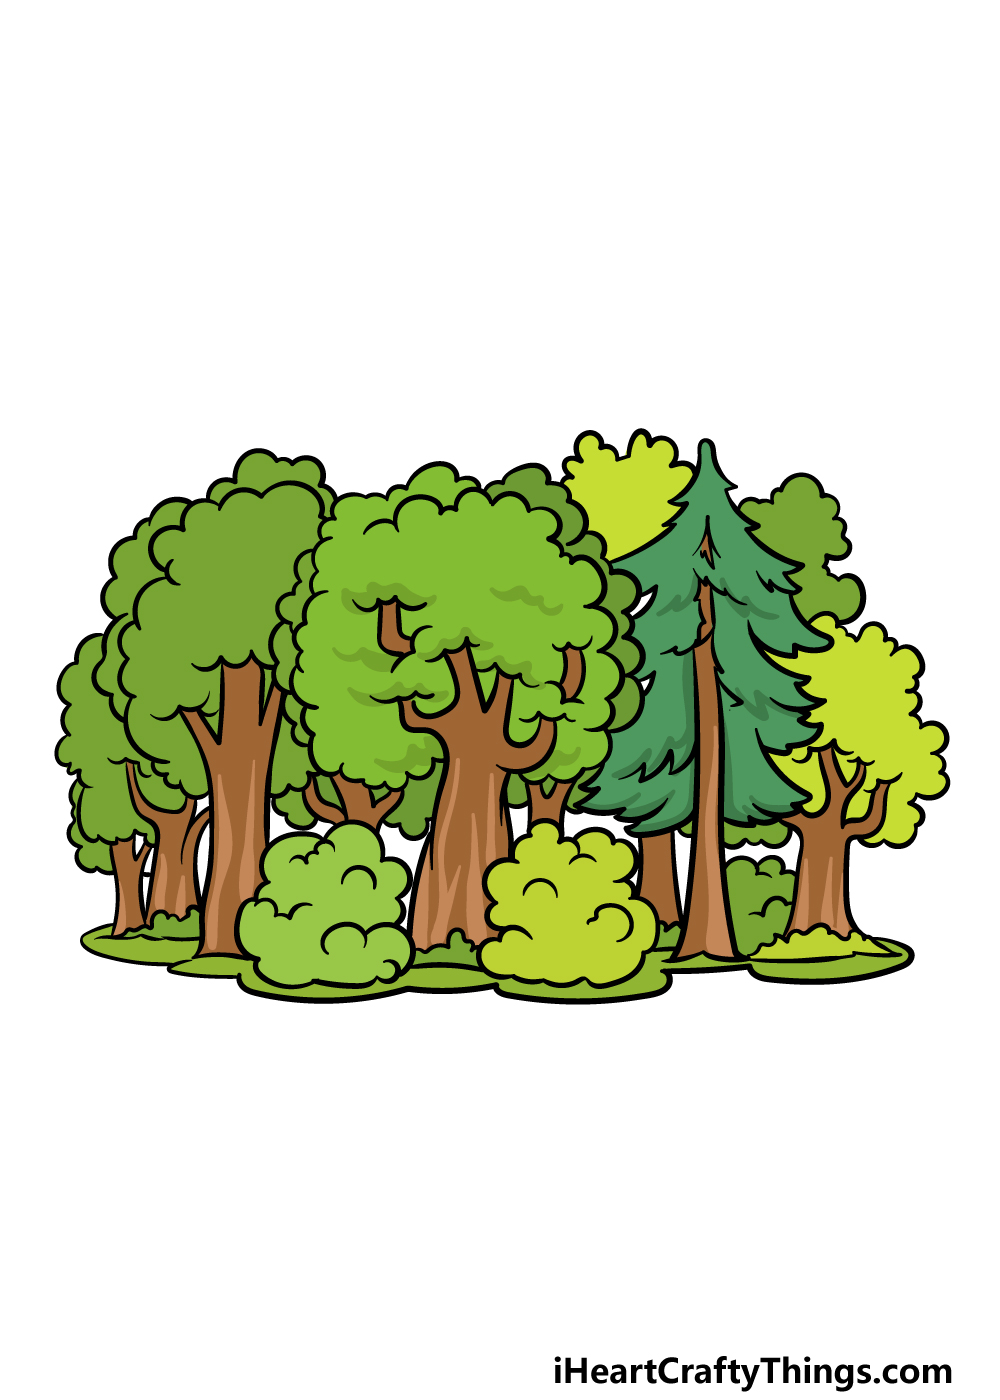 Cartoon Forest Drawing - How To Draw A Cartoon Forest Step By Step